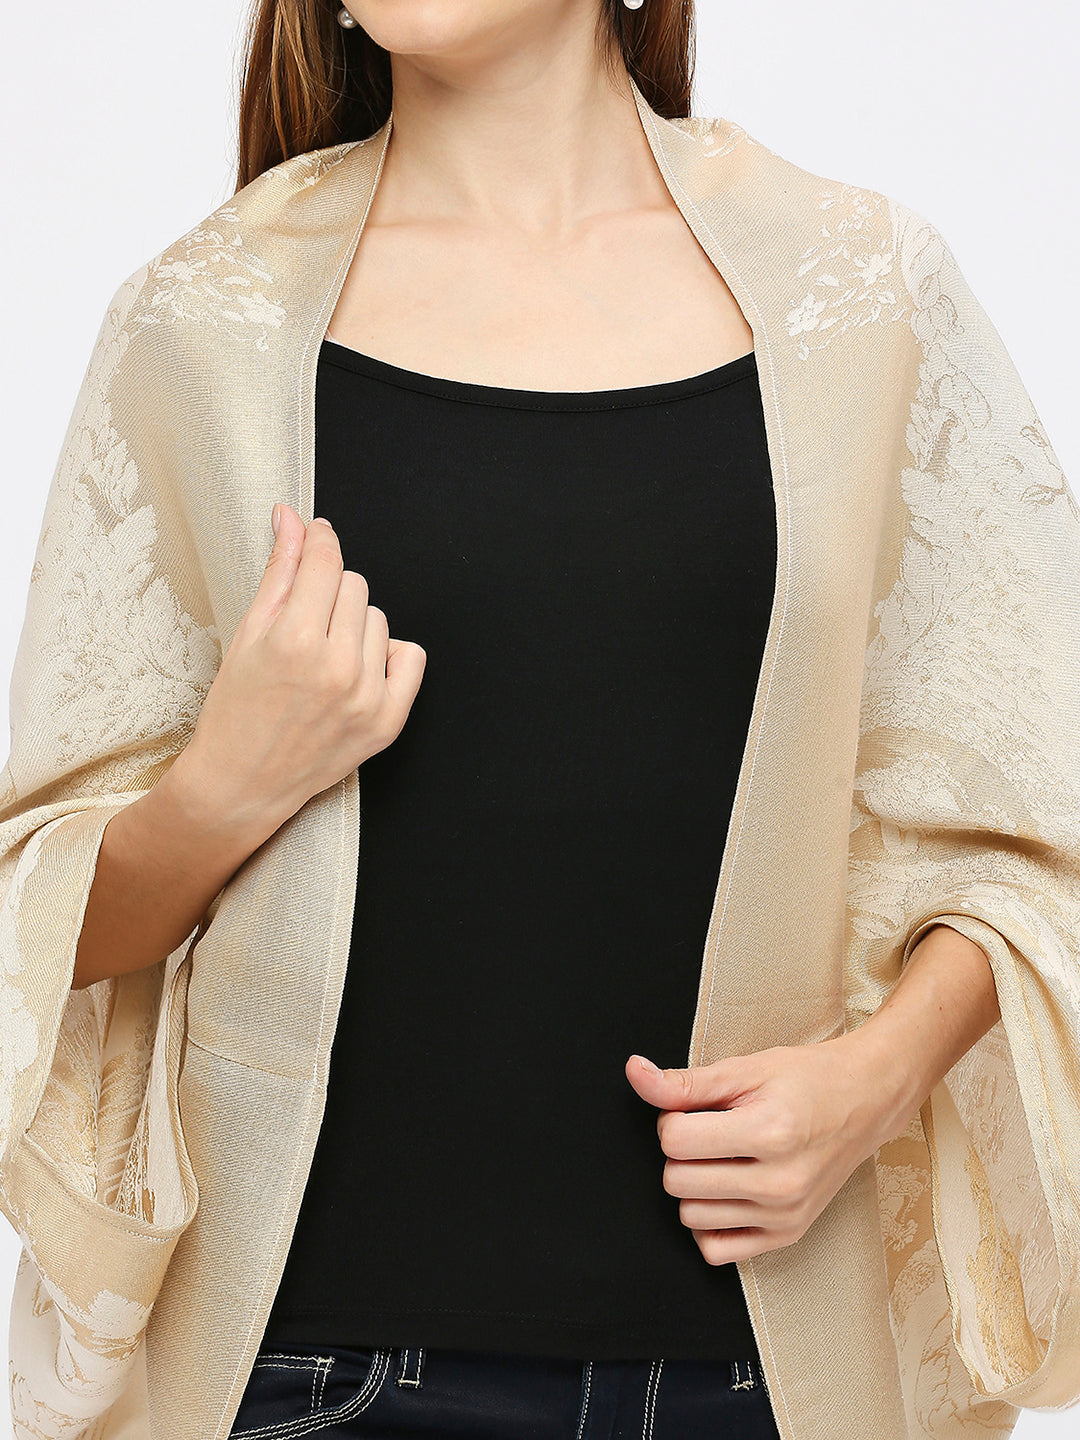 Brocade French Patterned Off-White Cape